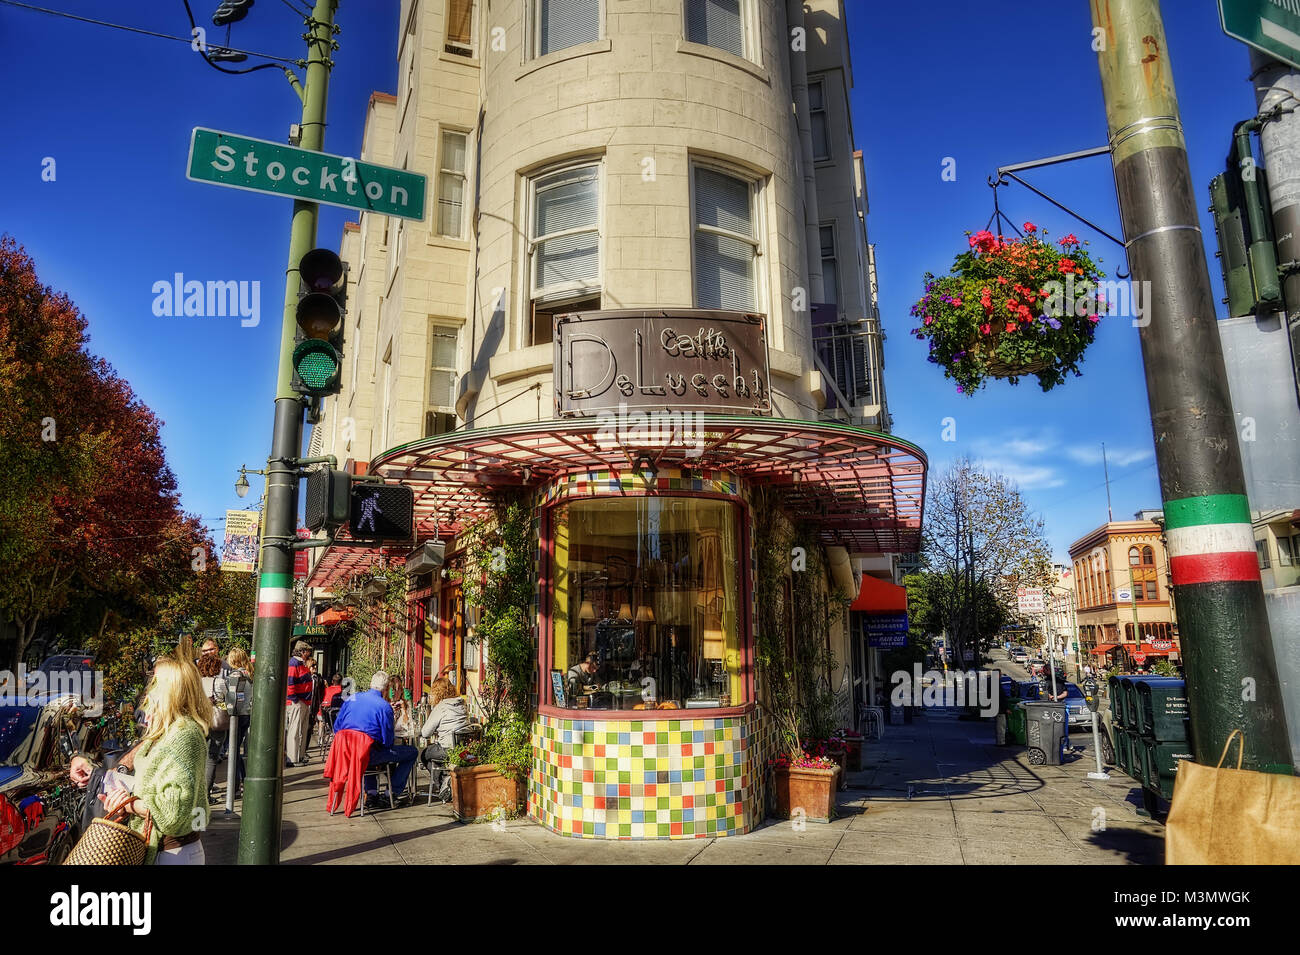 Little Italy San Francisco High Resolution Stock Photography and Images